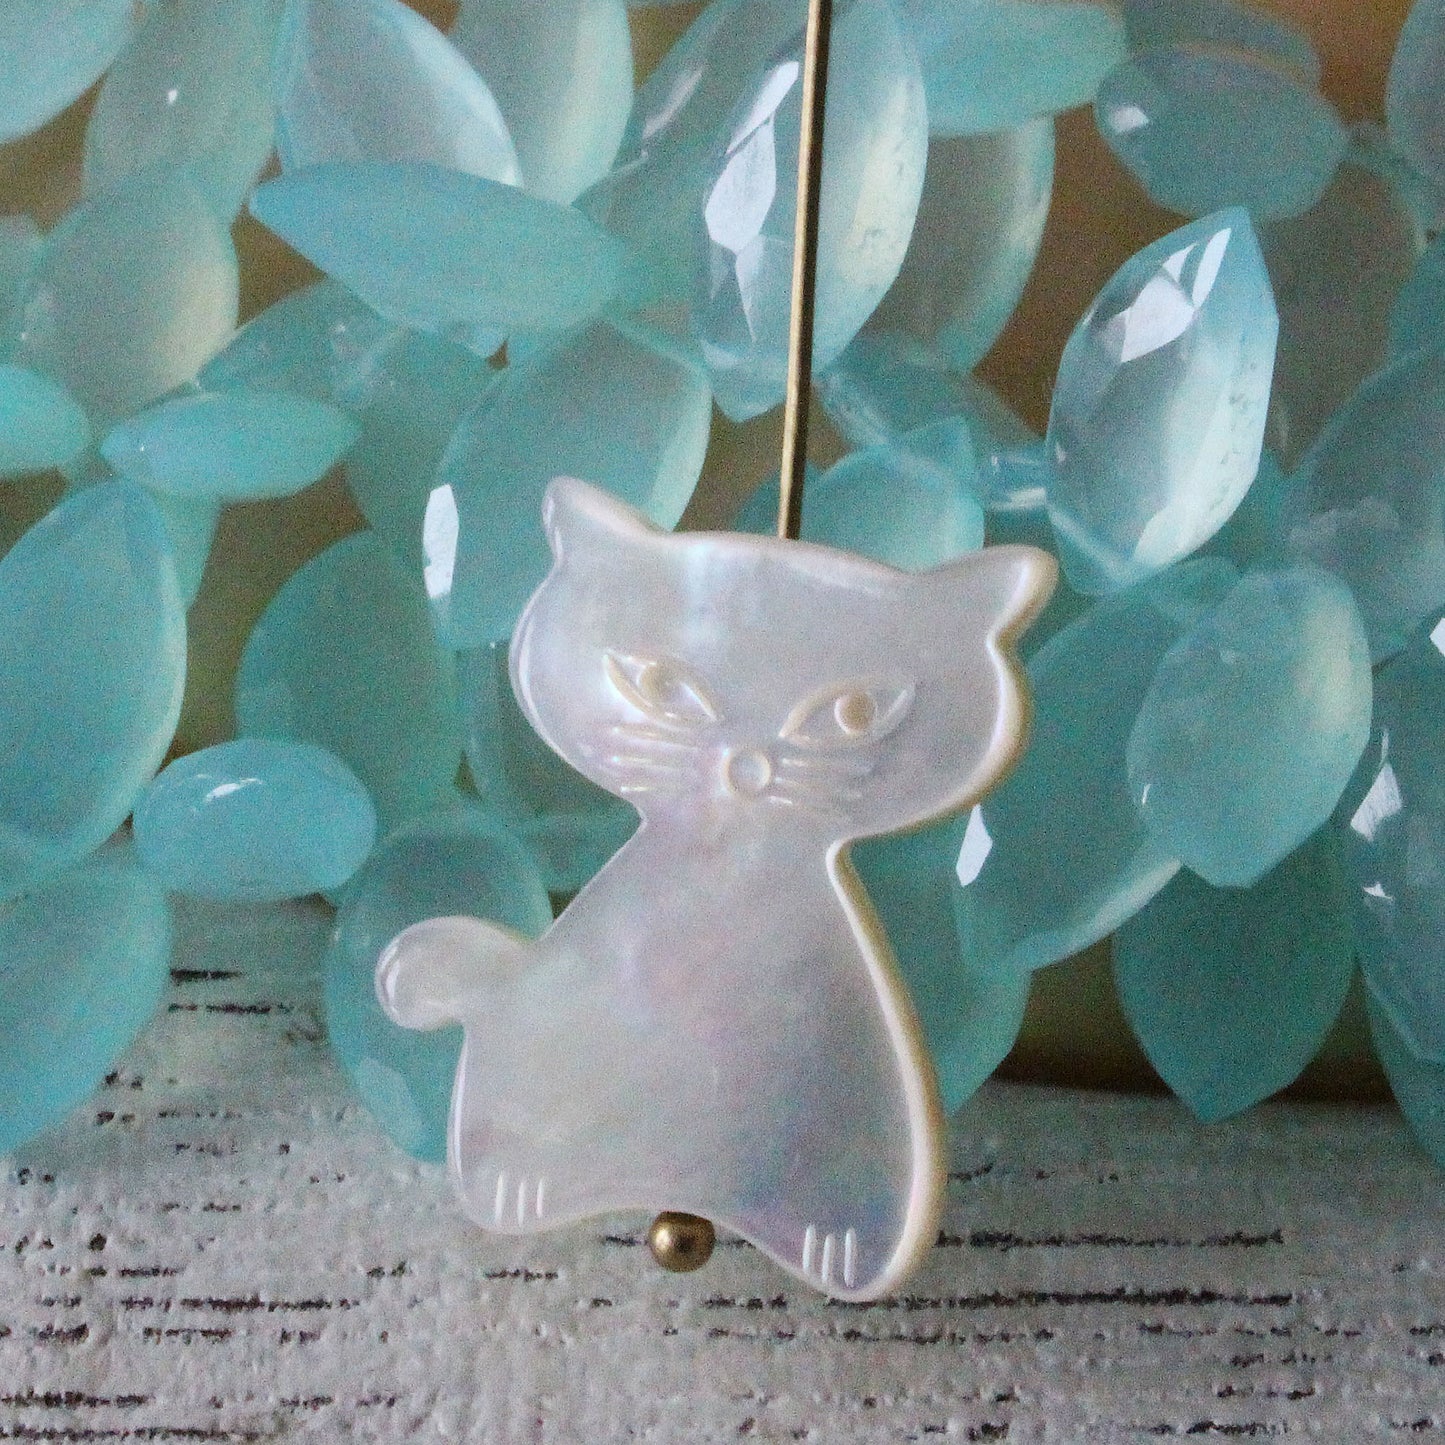 Mother of Pearl Shell Carved Kitty Cat Beads - 1 Pair